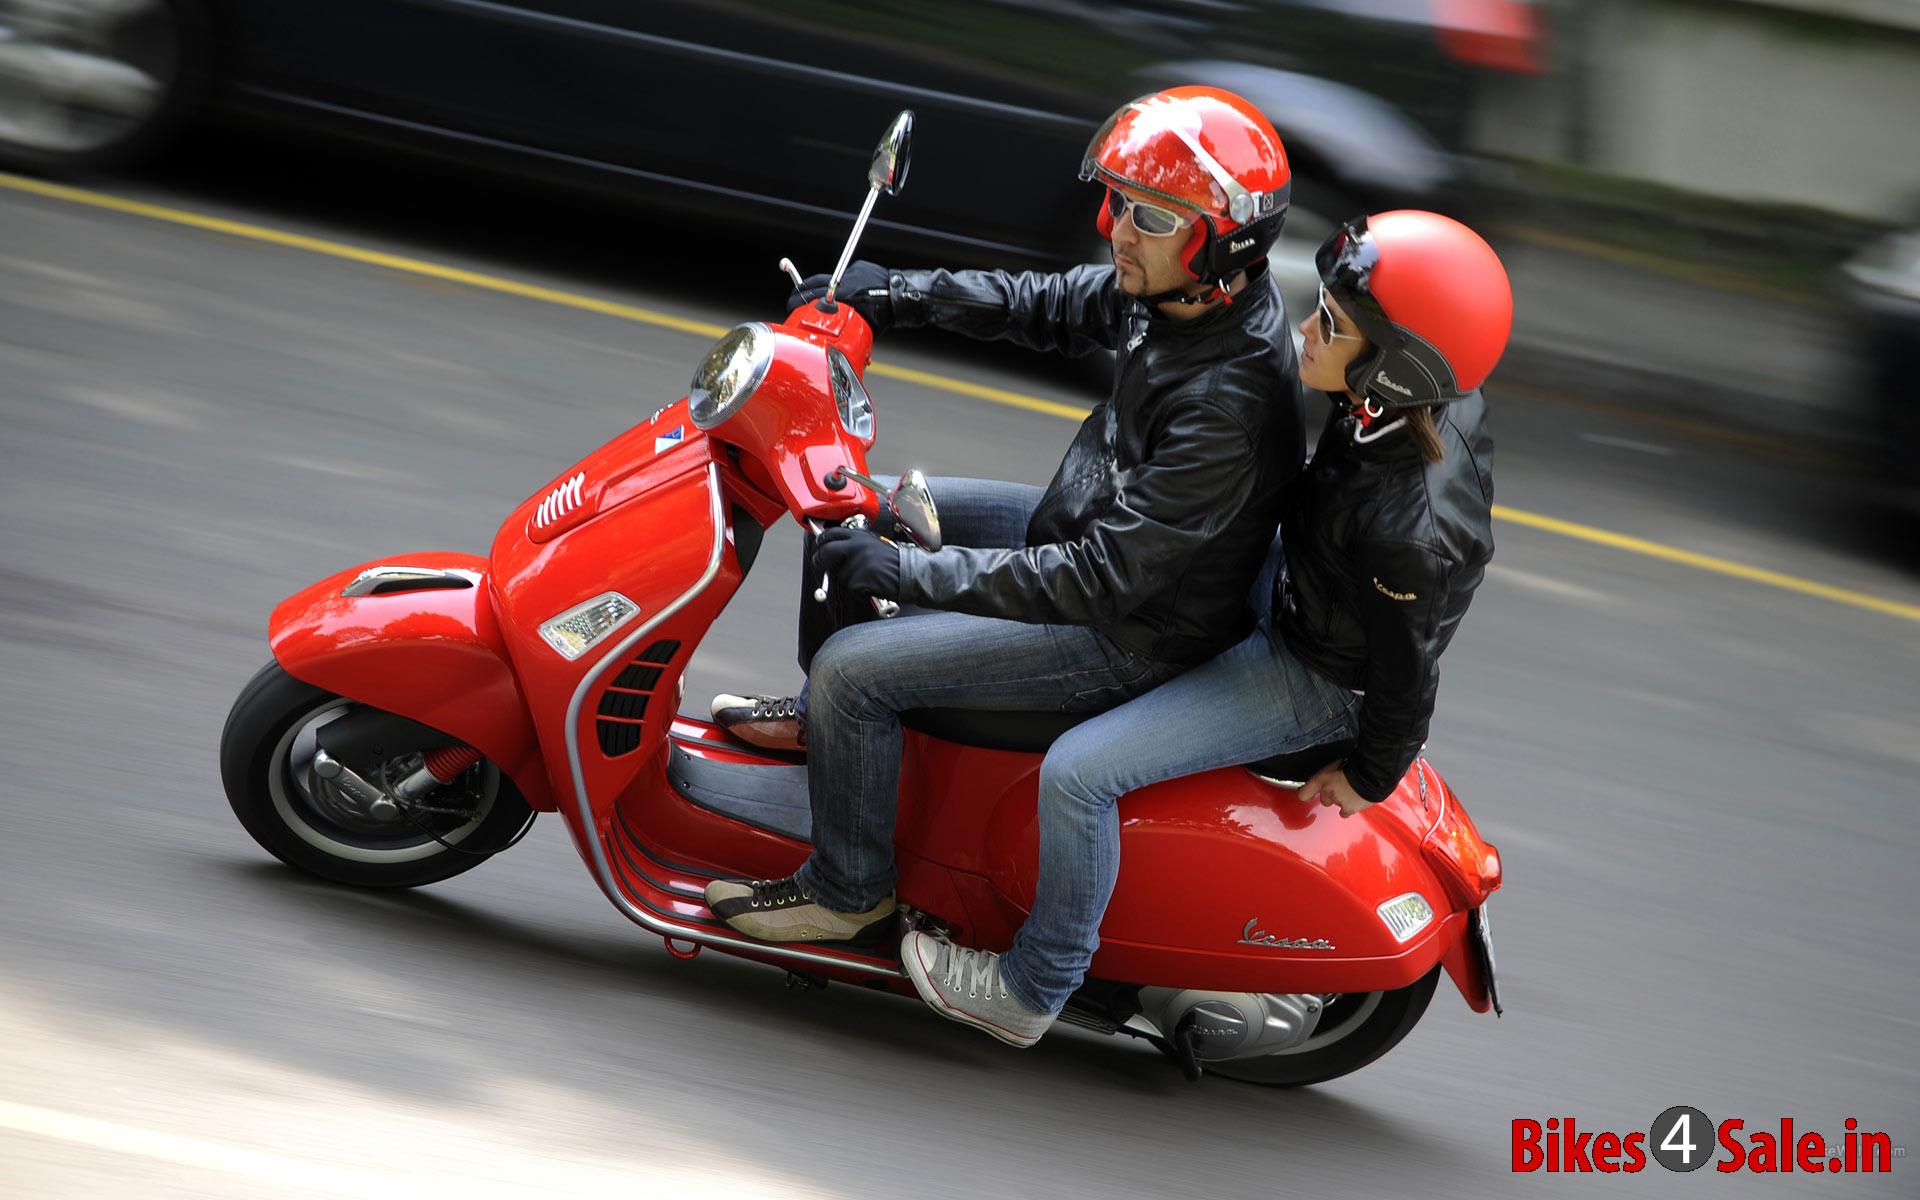 Vespa S 125 - Picture shows, a guy riding the Vespa S 125 of red color with a girl behind him